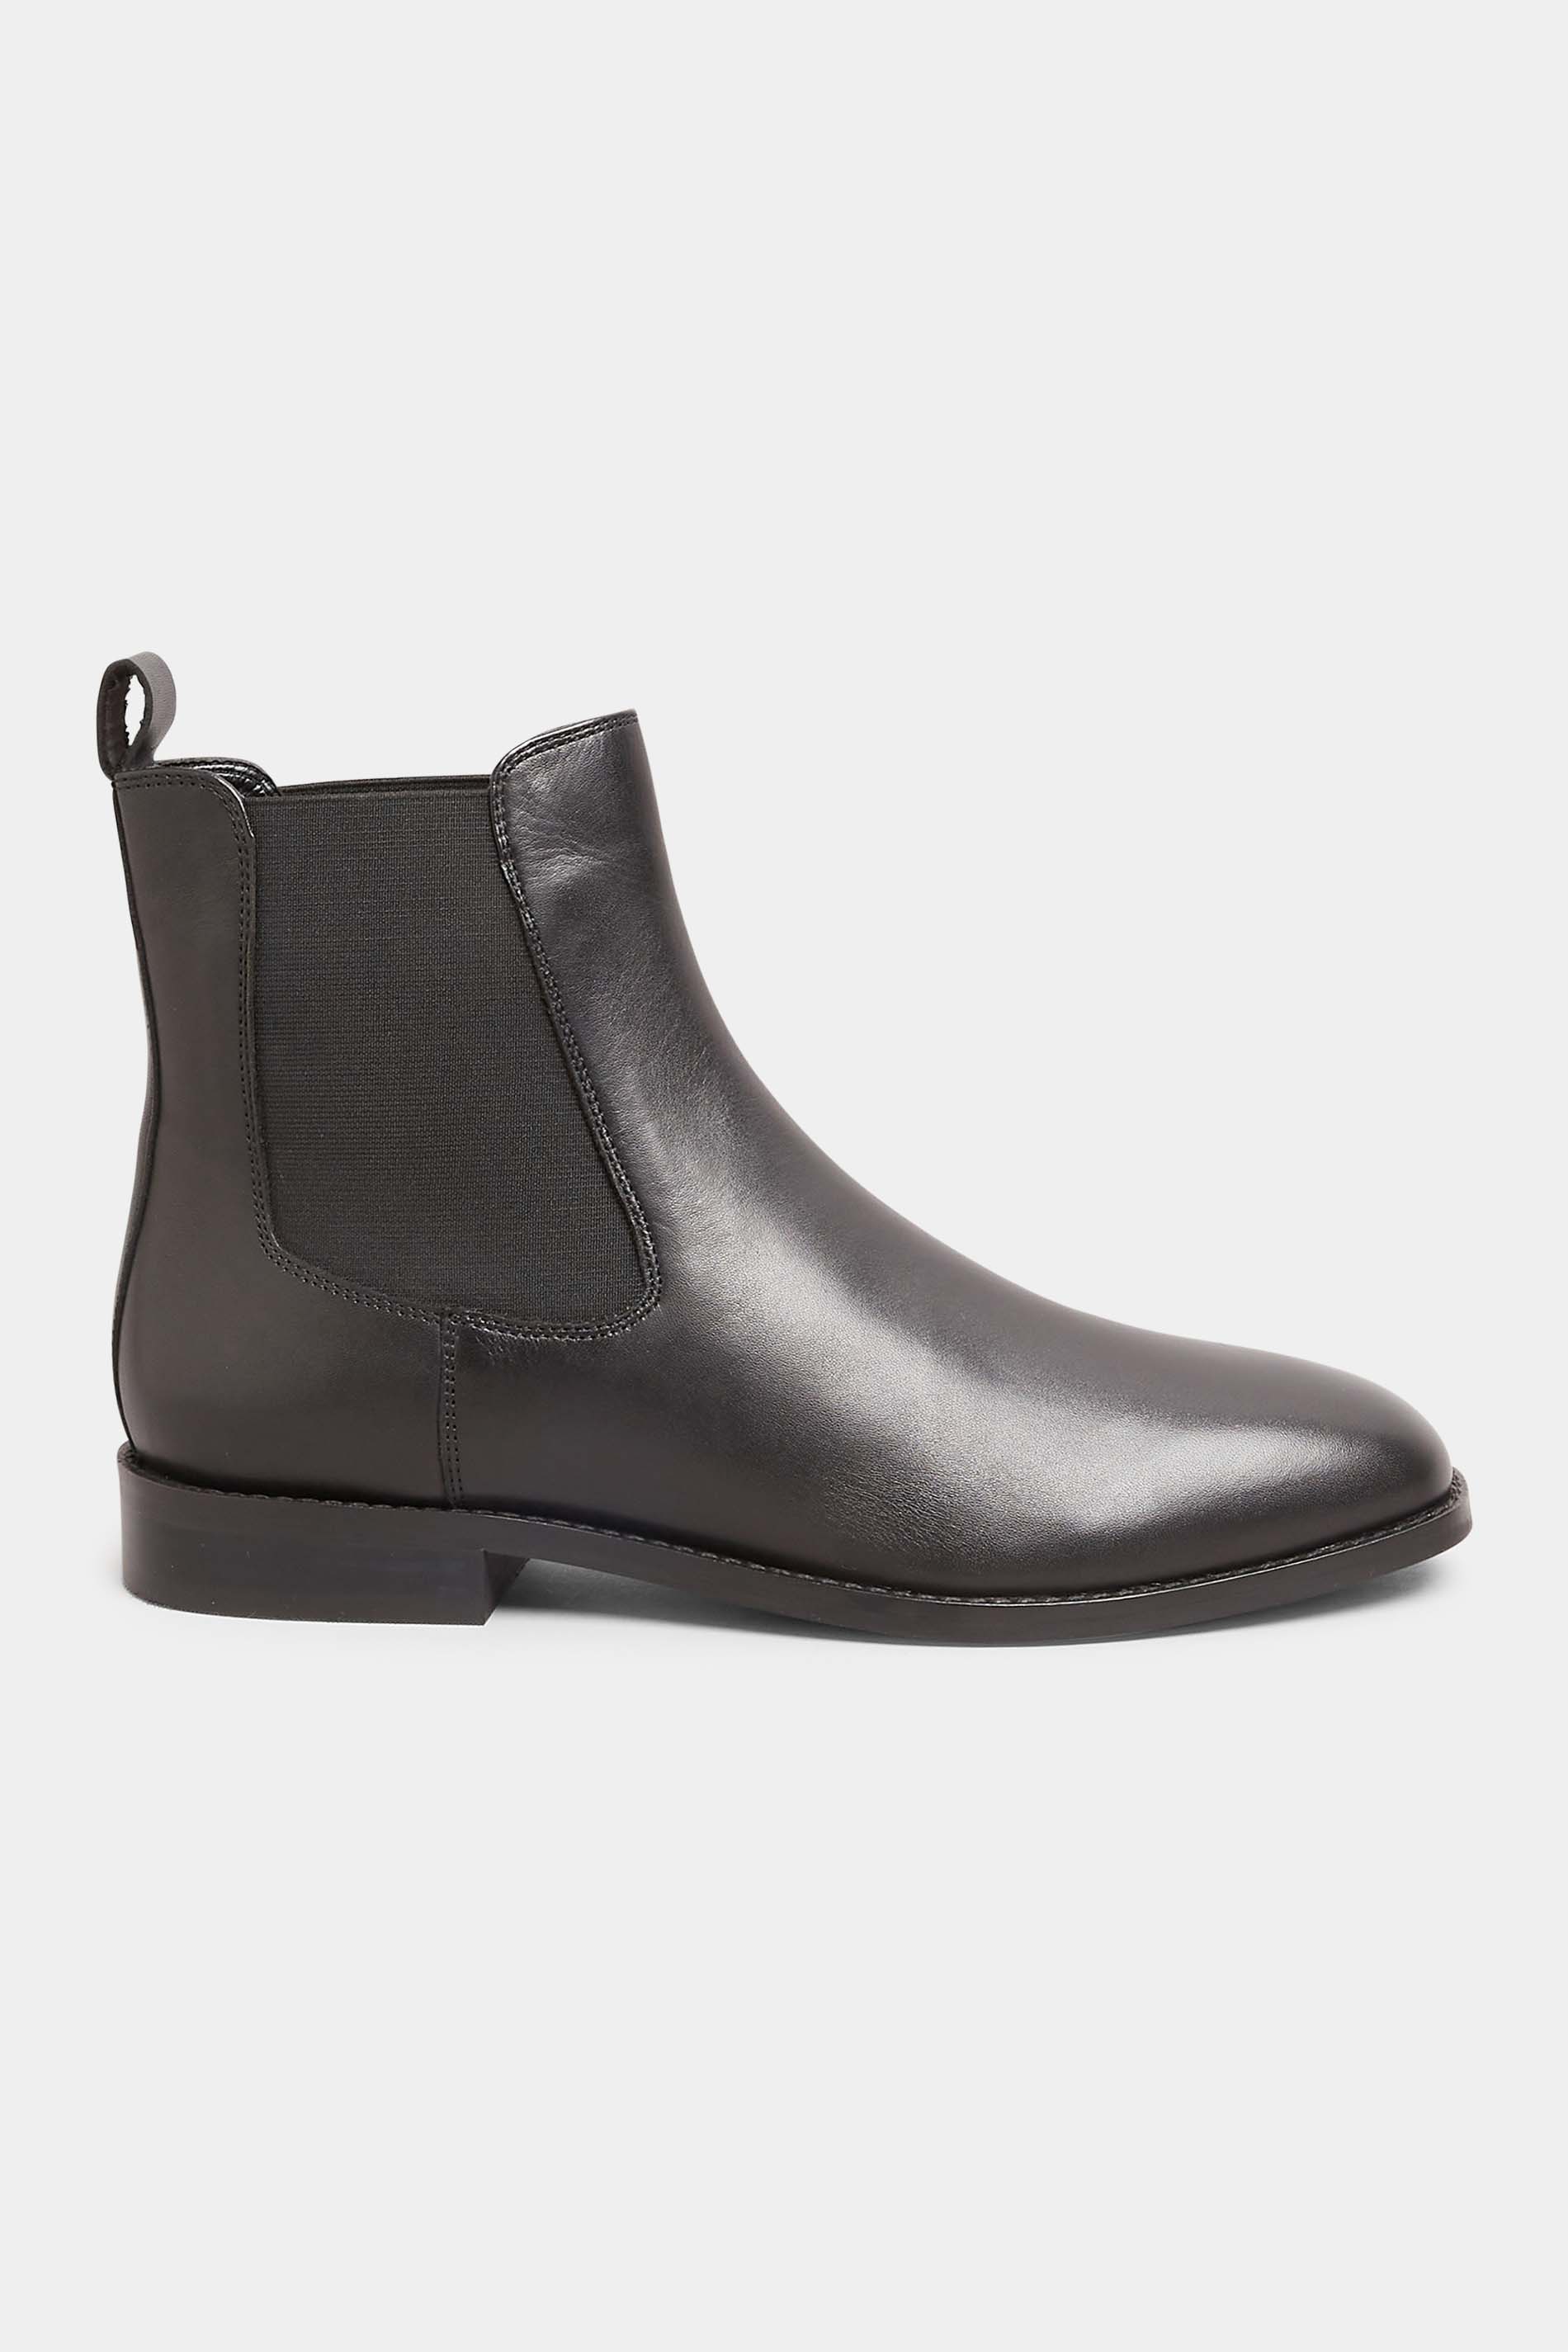 LTS Black Leather Chelsea Boots In Standard Fit | Long Tall Sally